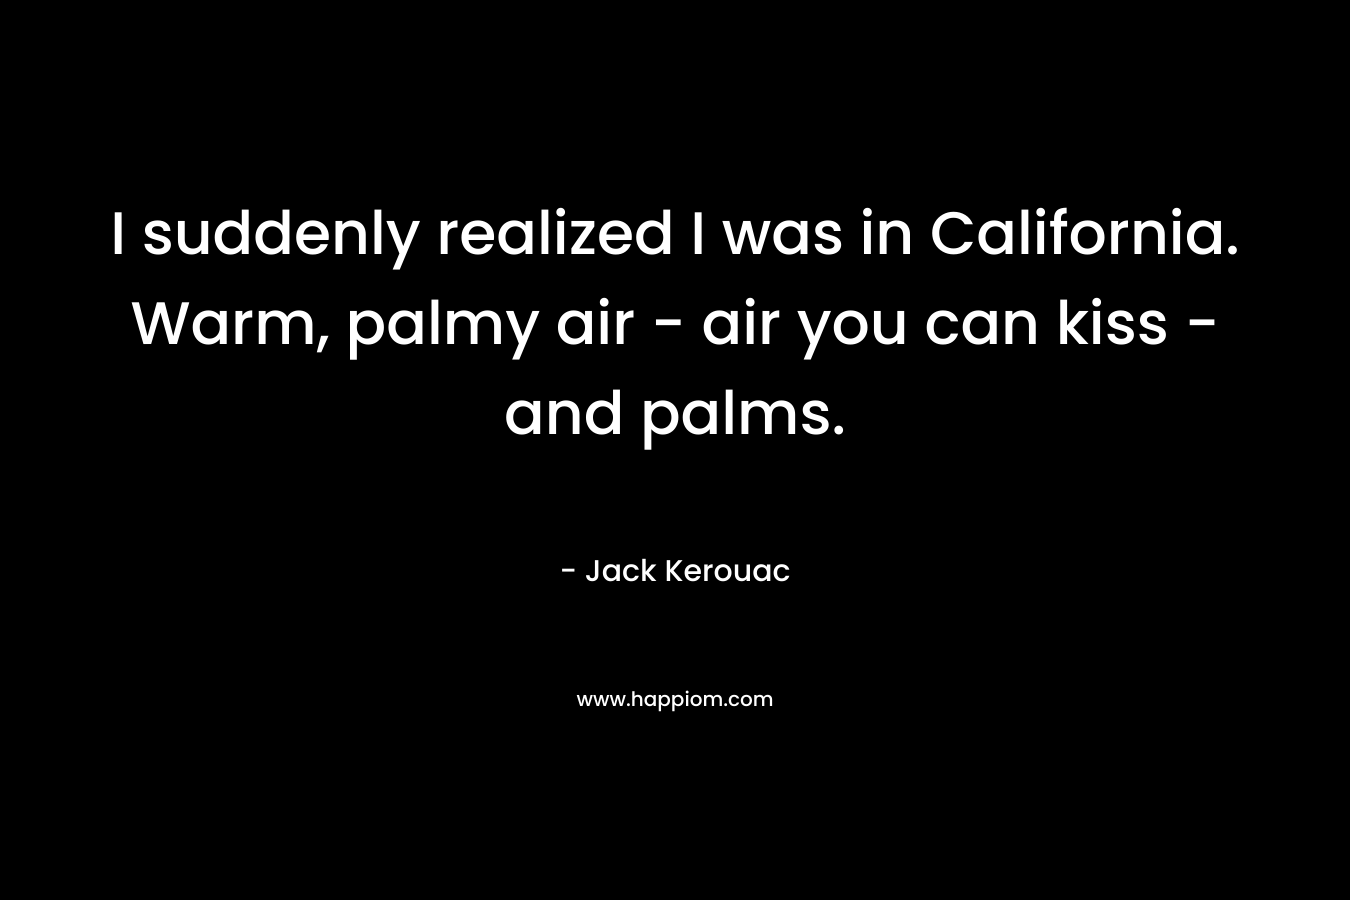 I suddenly realized I was in California. Warm, palmy air – air you can kiss – and palms. – Jack Kerouac